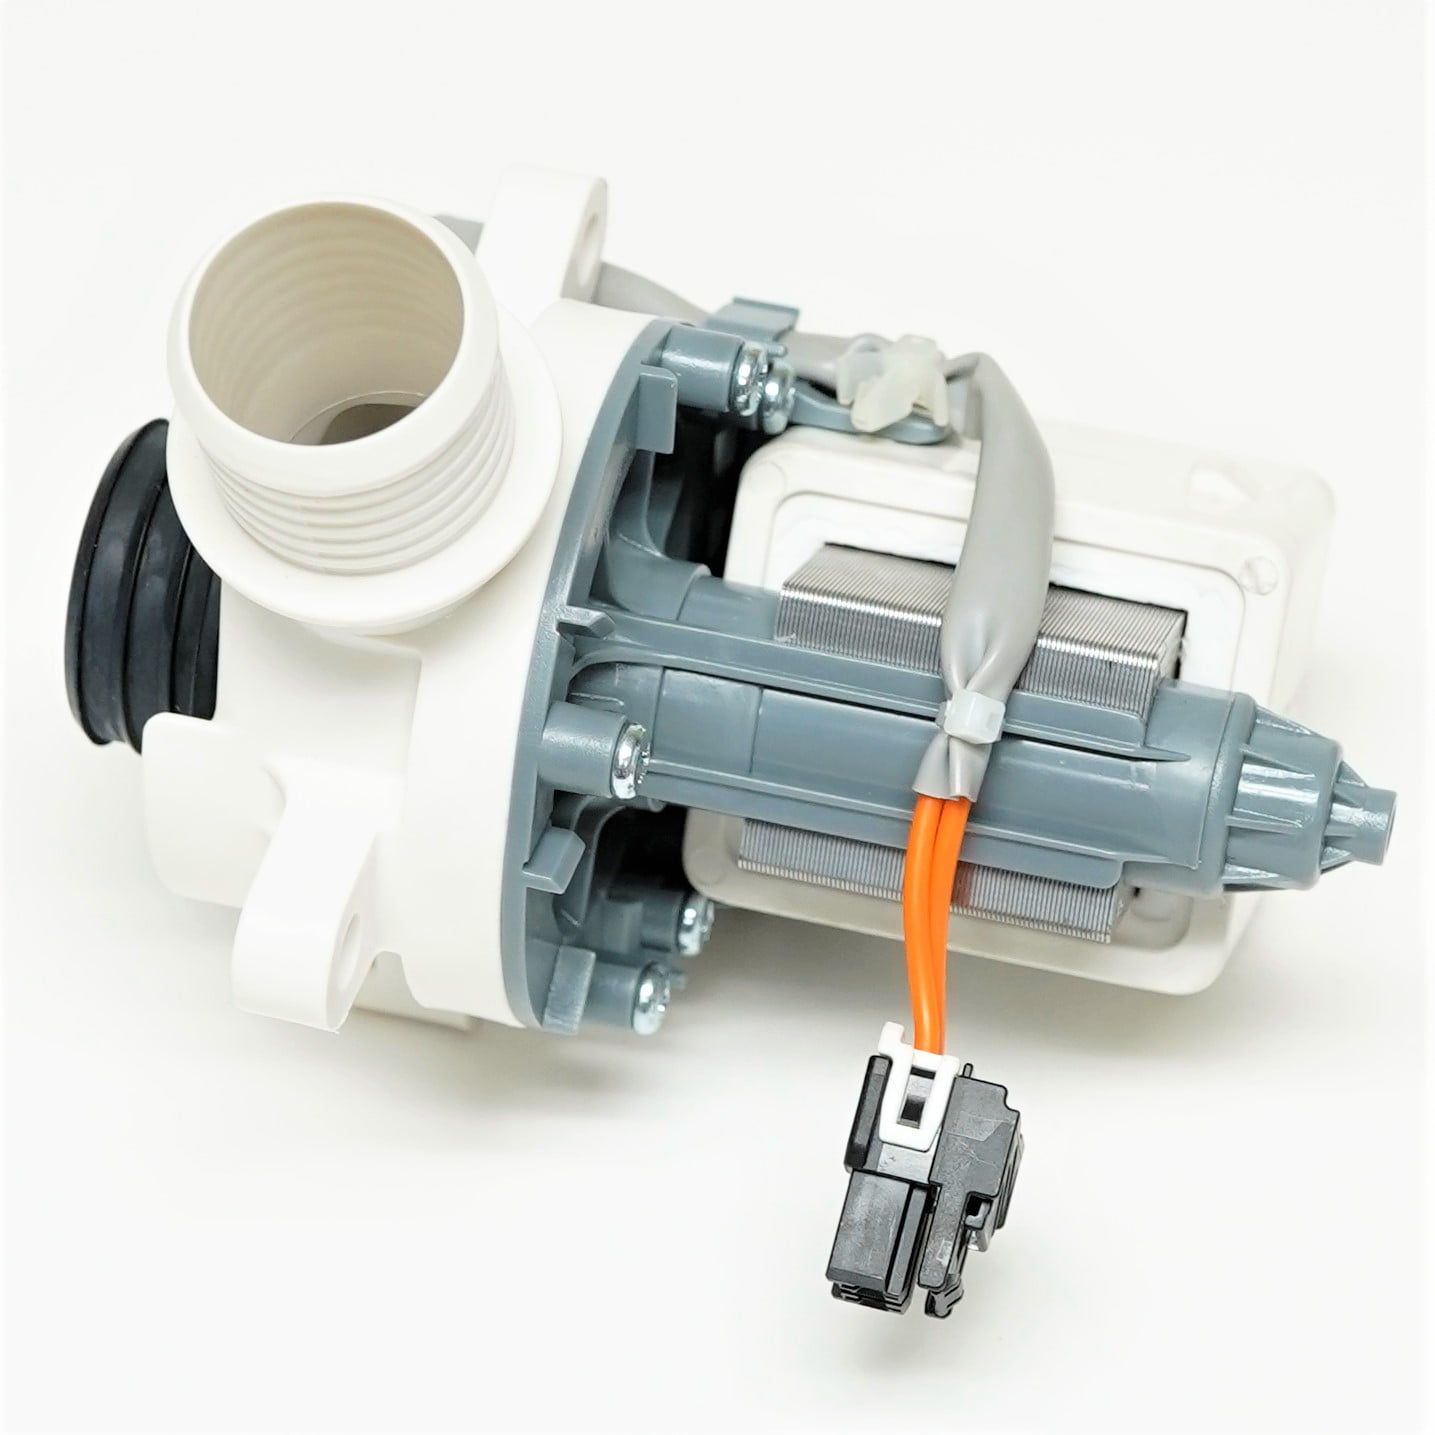 Fits Your Washer Details about   Drain Pump For whirlpool duet WFW9/ GHW9/ 7MGHW9. series 